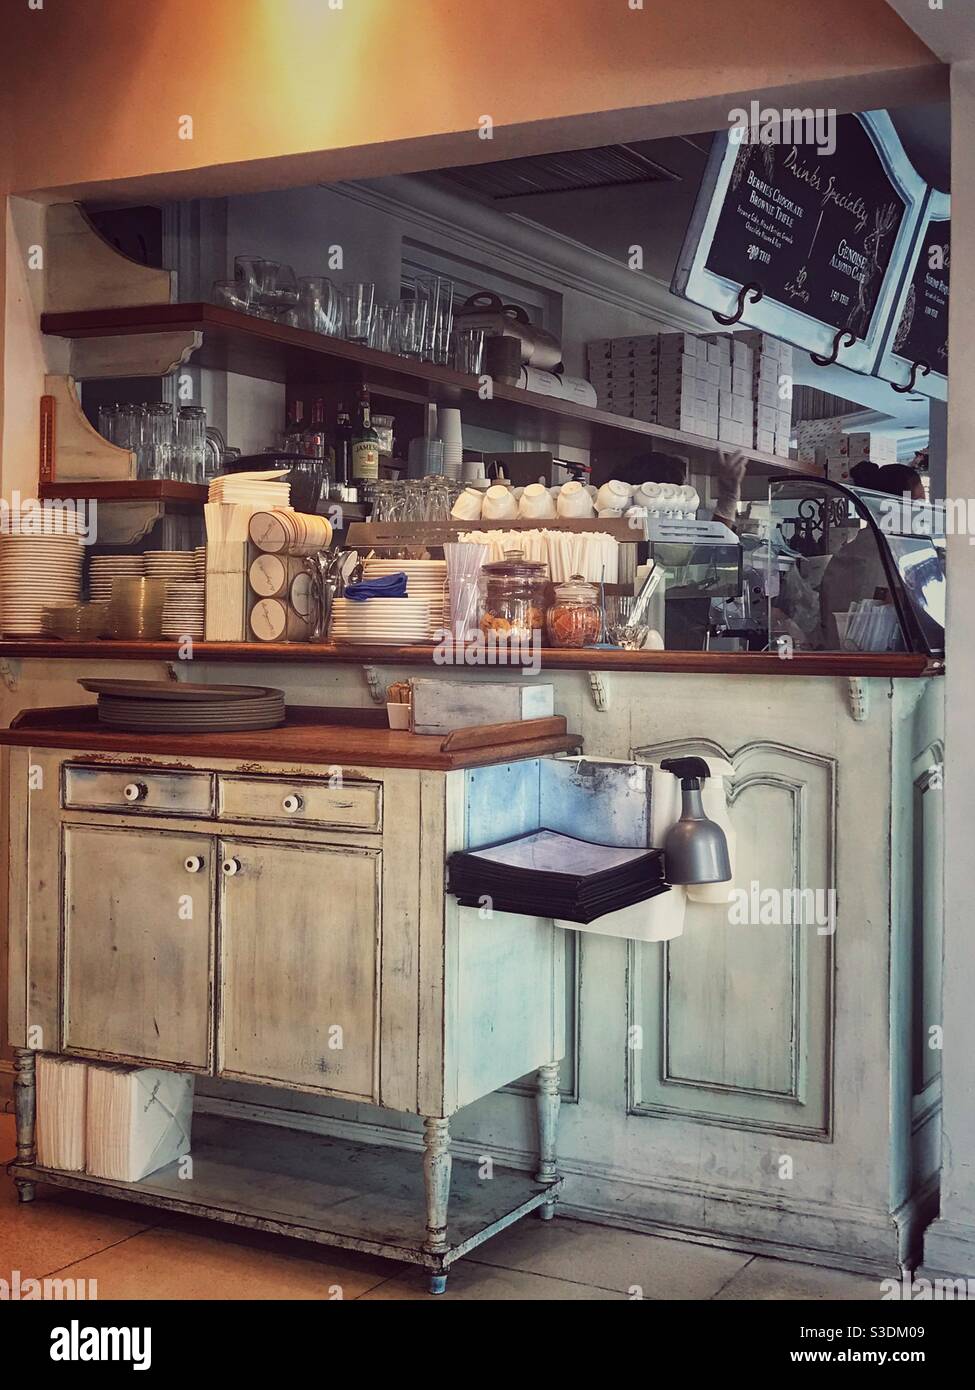 Retro styled coffee shop interior with counter display and serving area  hatch. Vintage styled fitting are also evident Stock Photo - Alamy